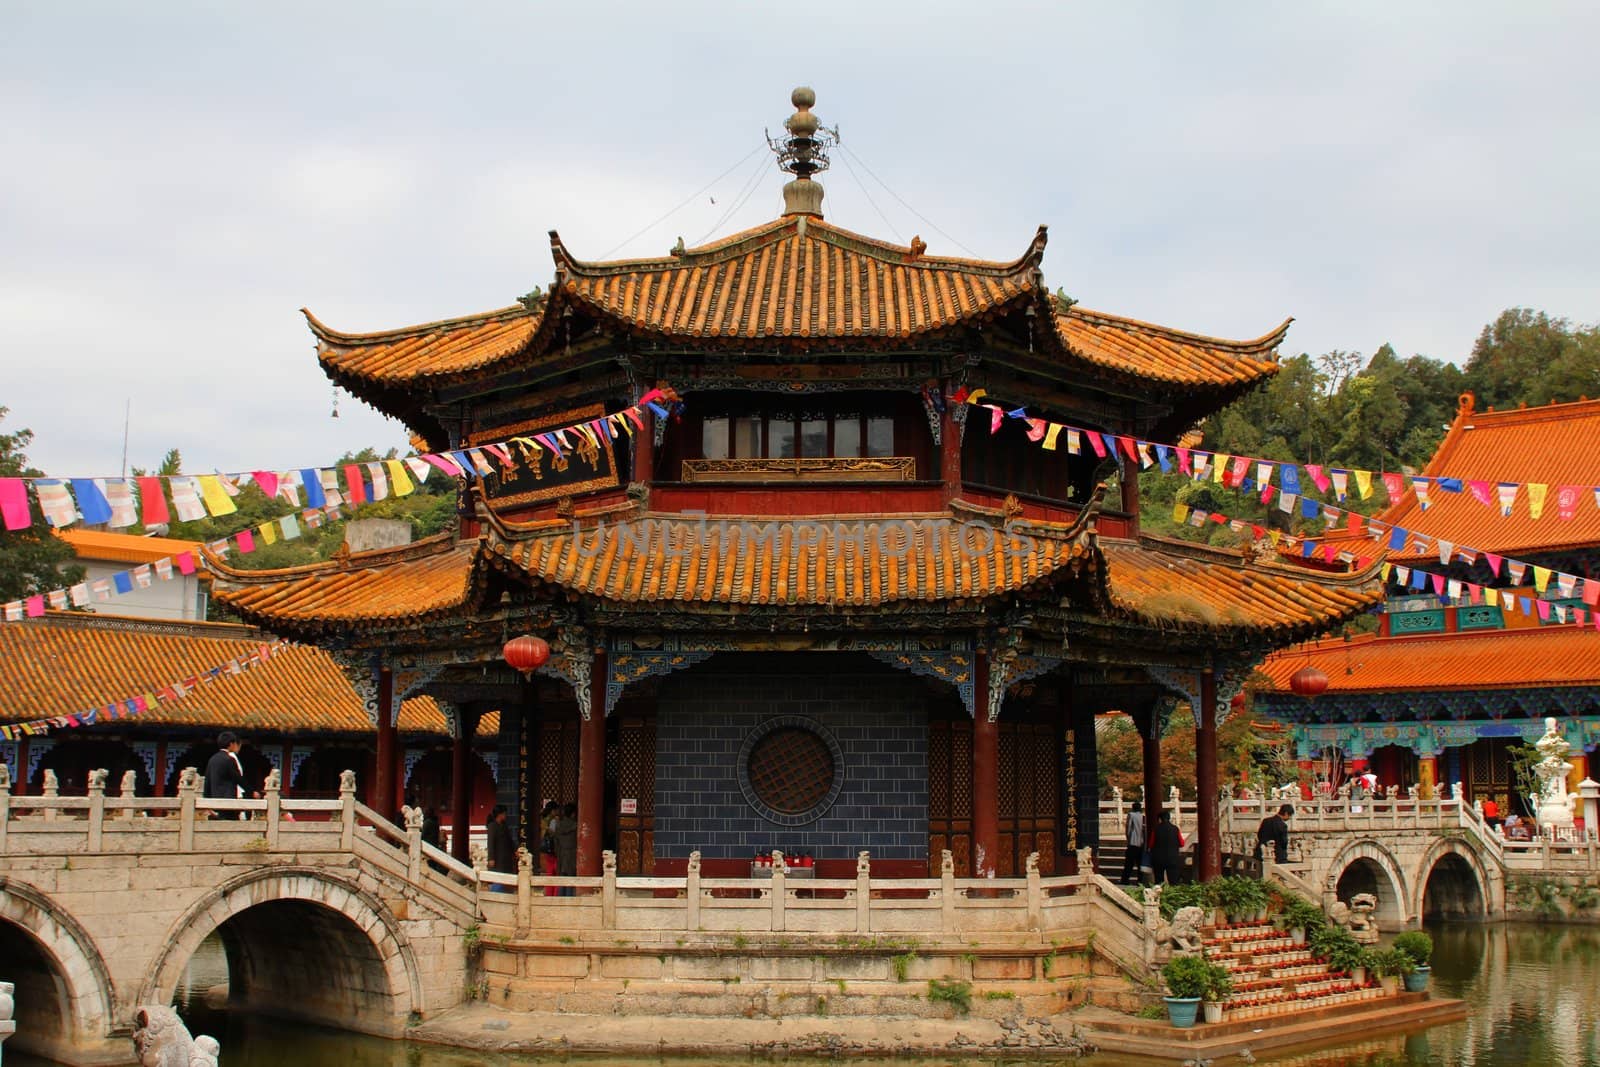 Yuantong temple, the biggest and most important Buddhist temple in Yunnan Province, China
